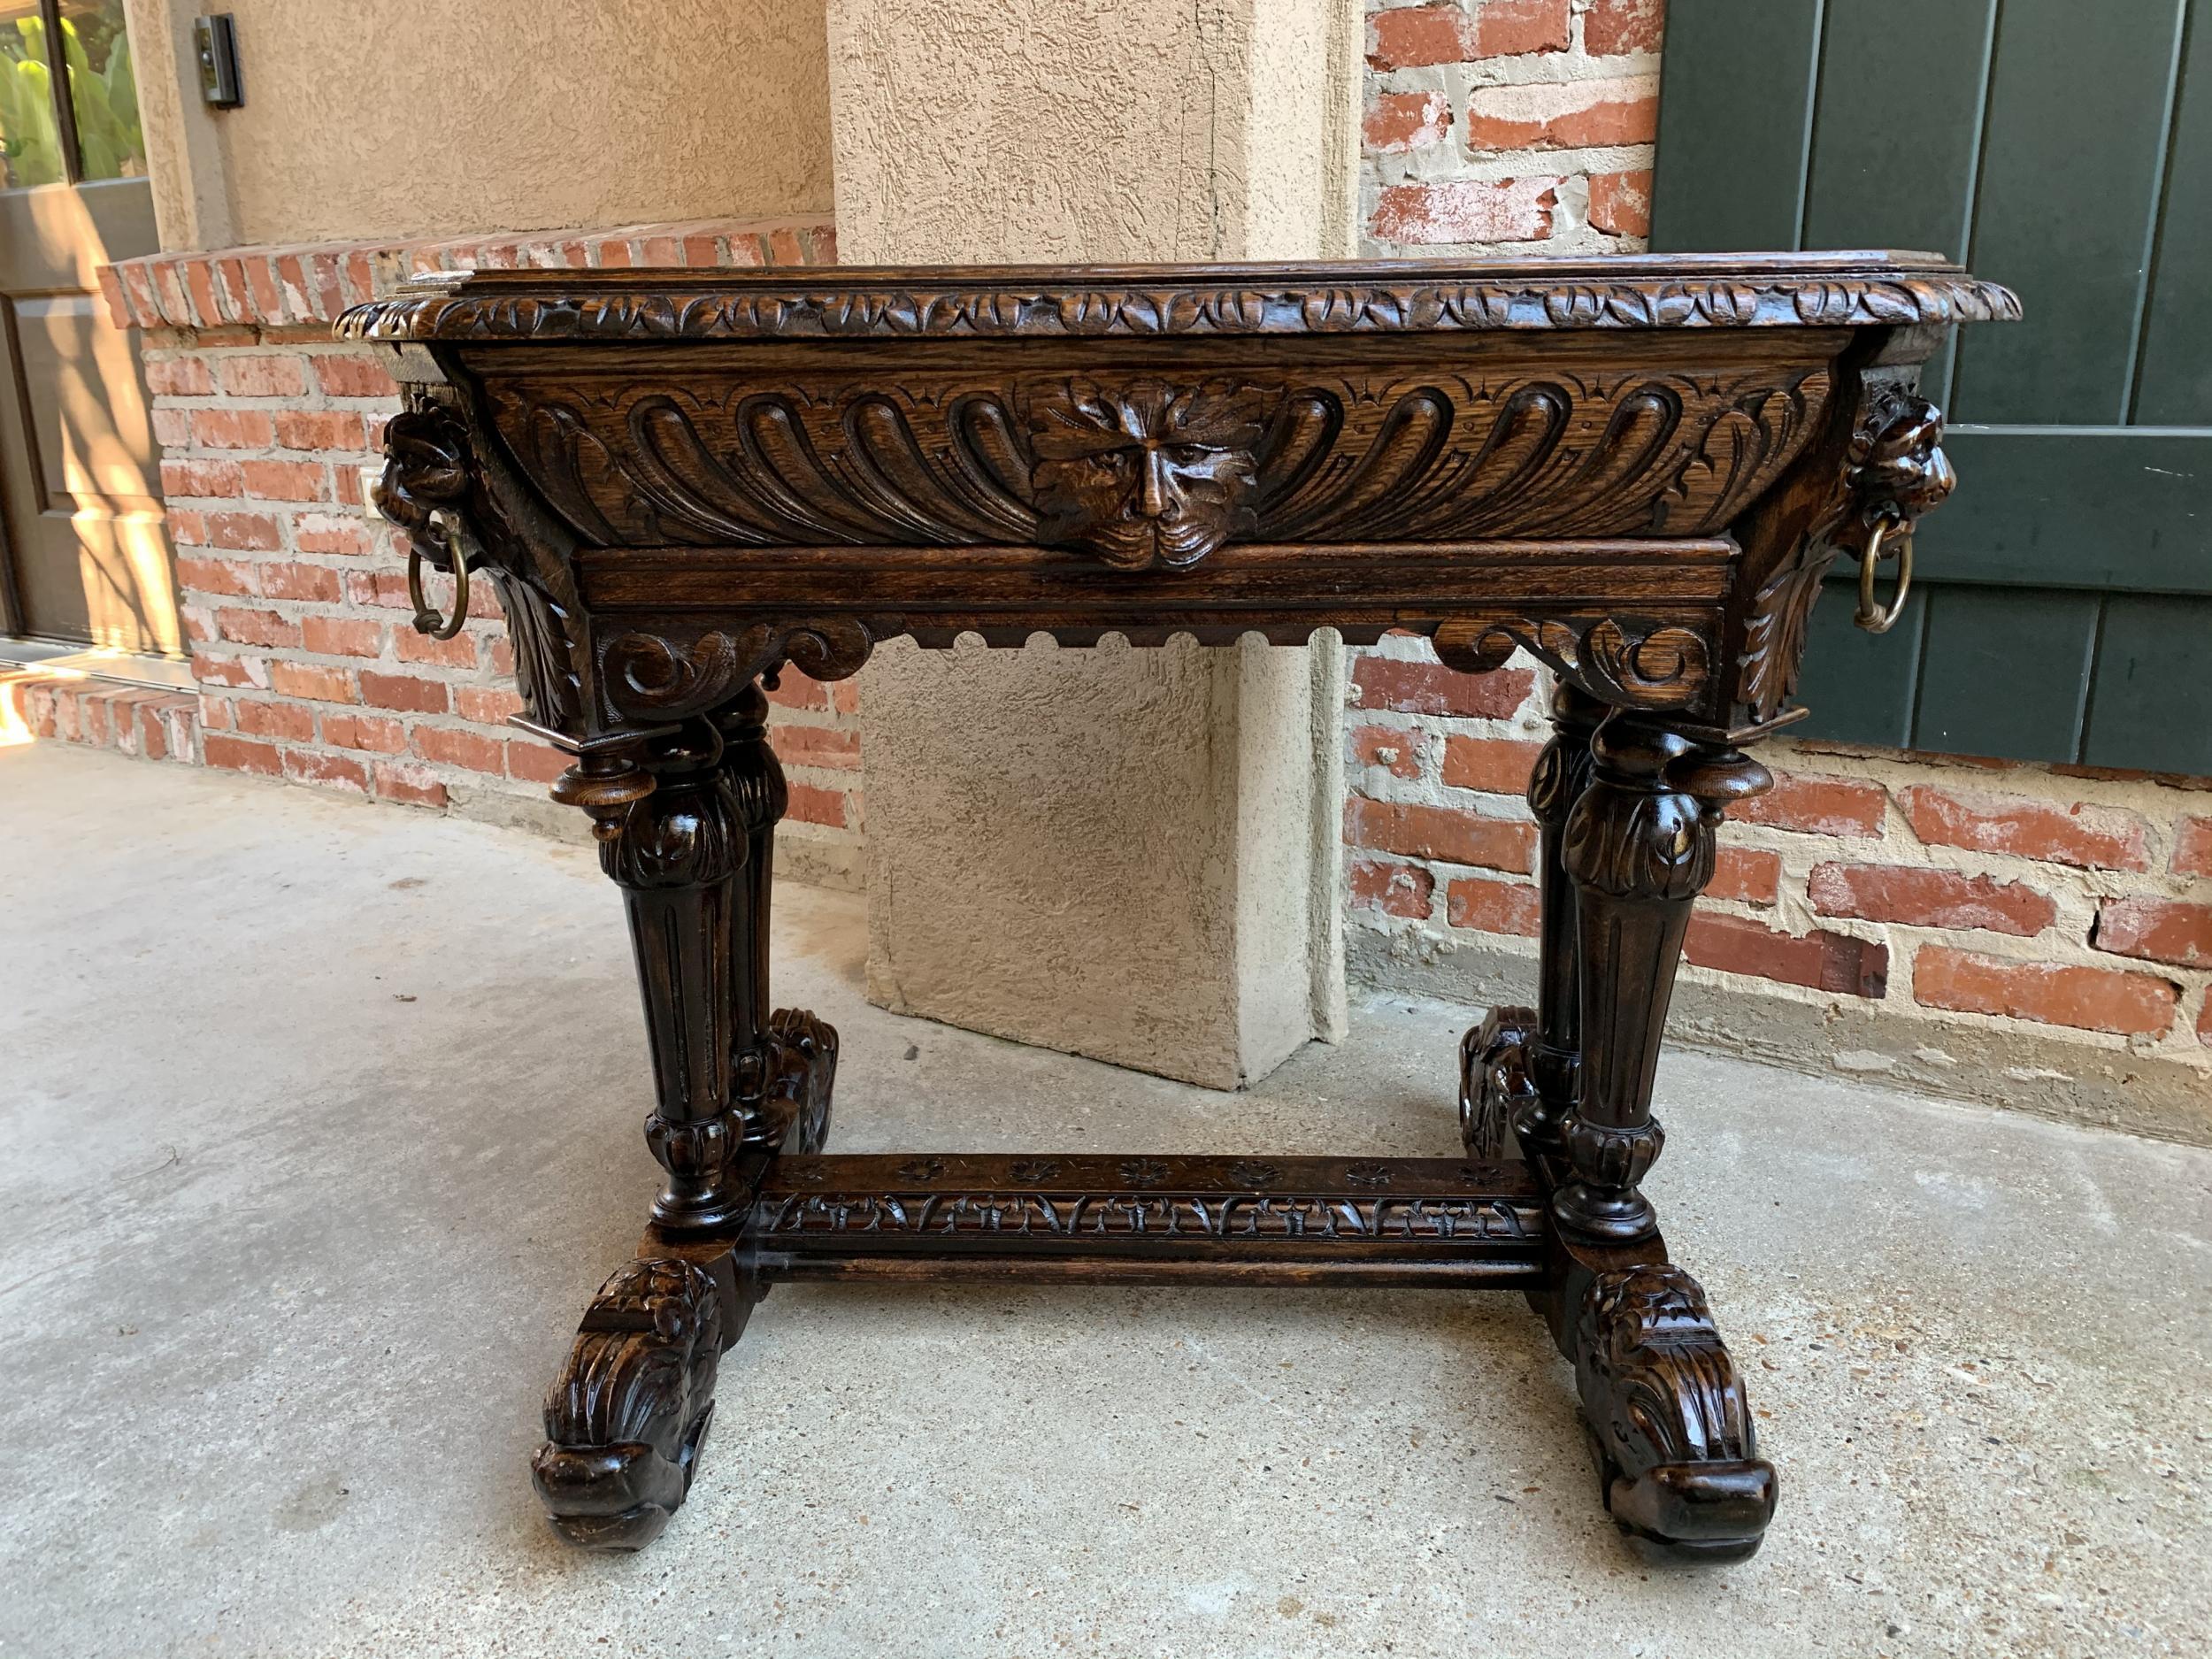 19th century Petite French carved oak dolphin table desk renaissance gothic

~Direct from France~
An elegant antique French carved library table or 